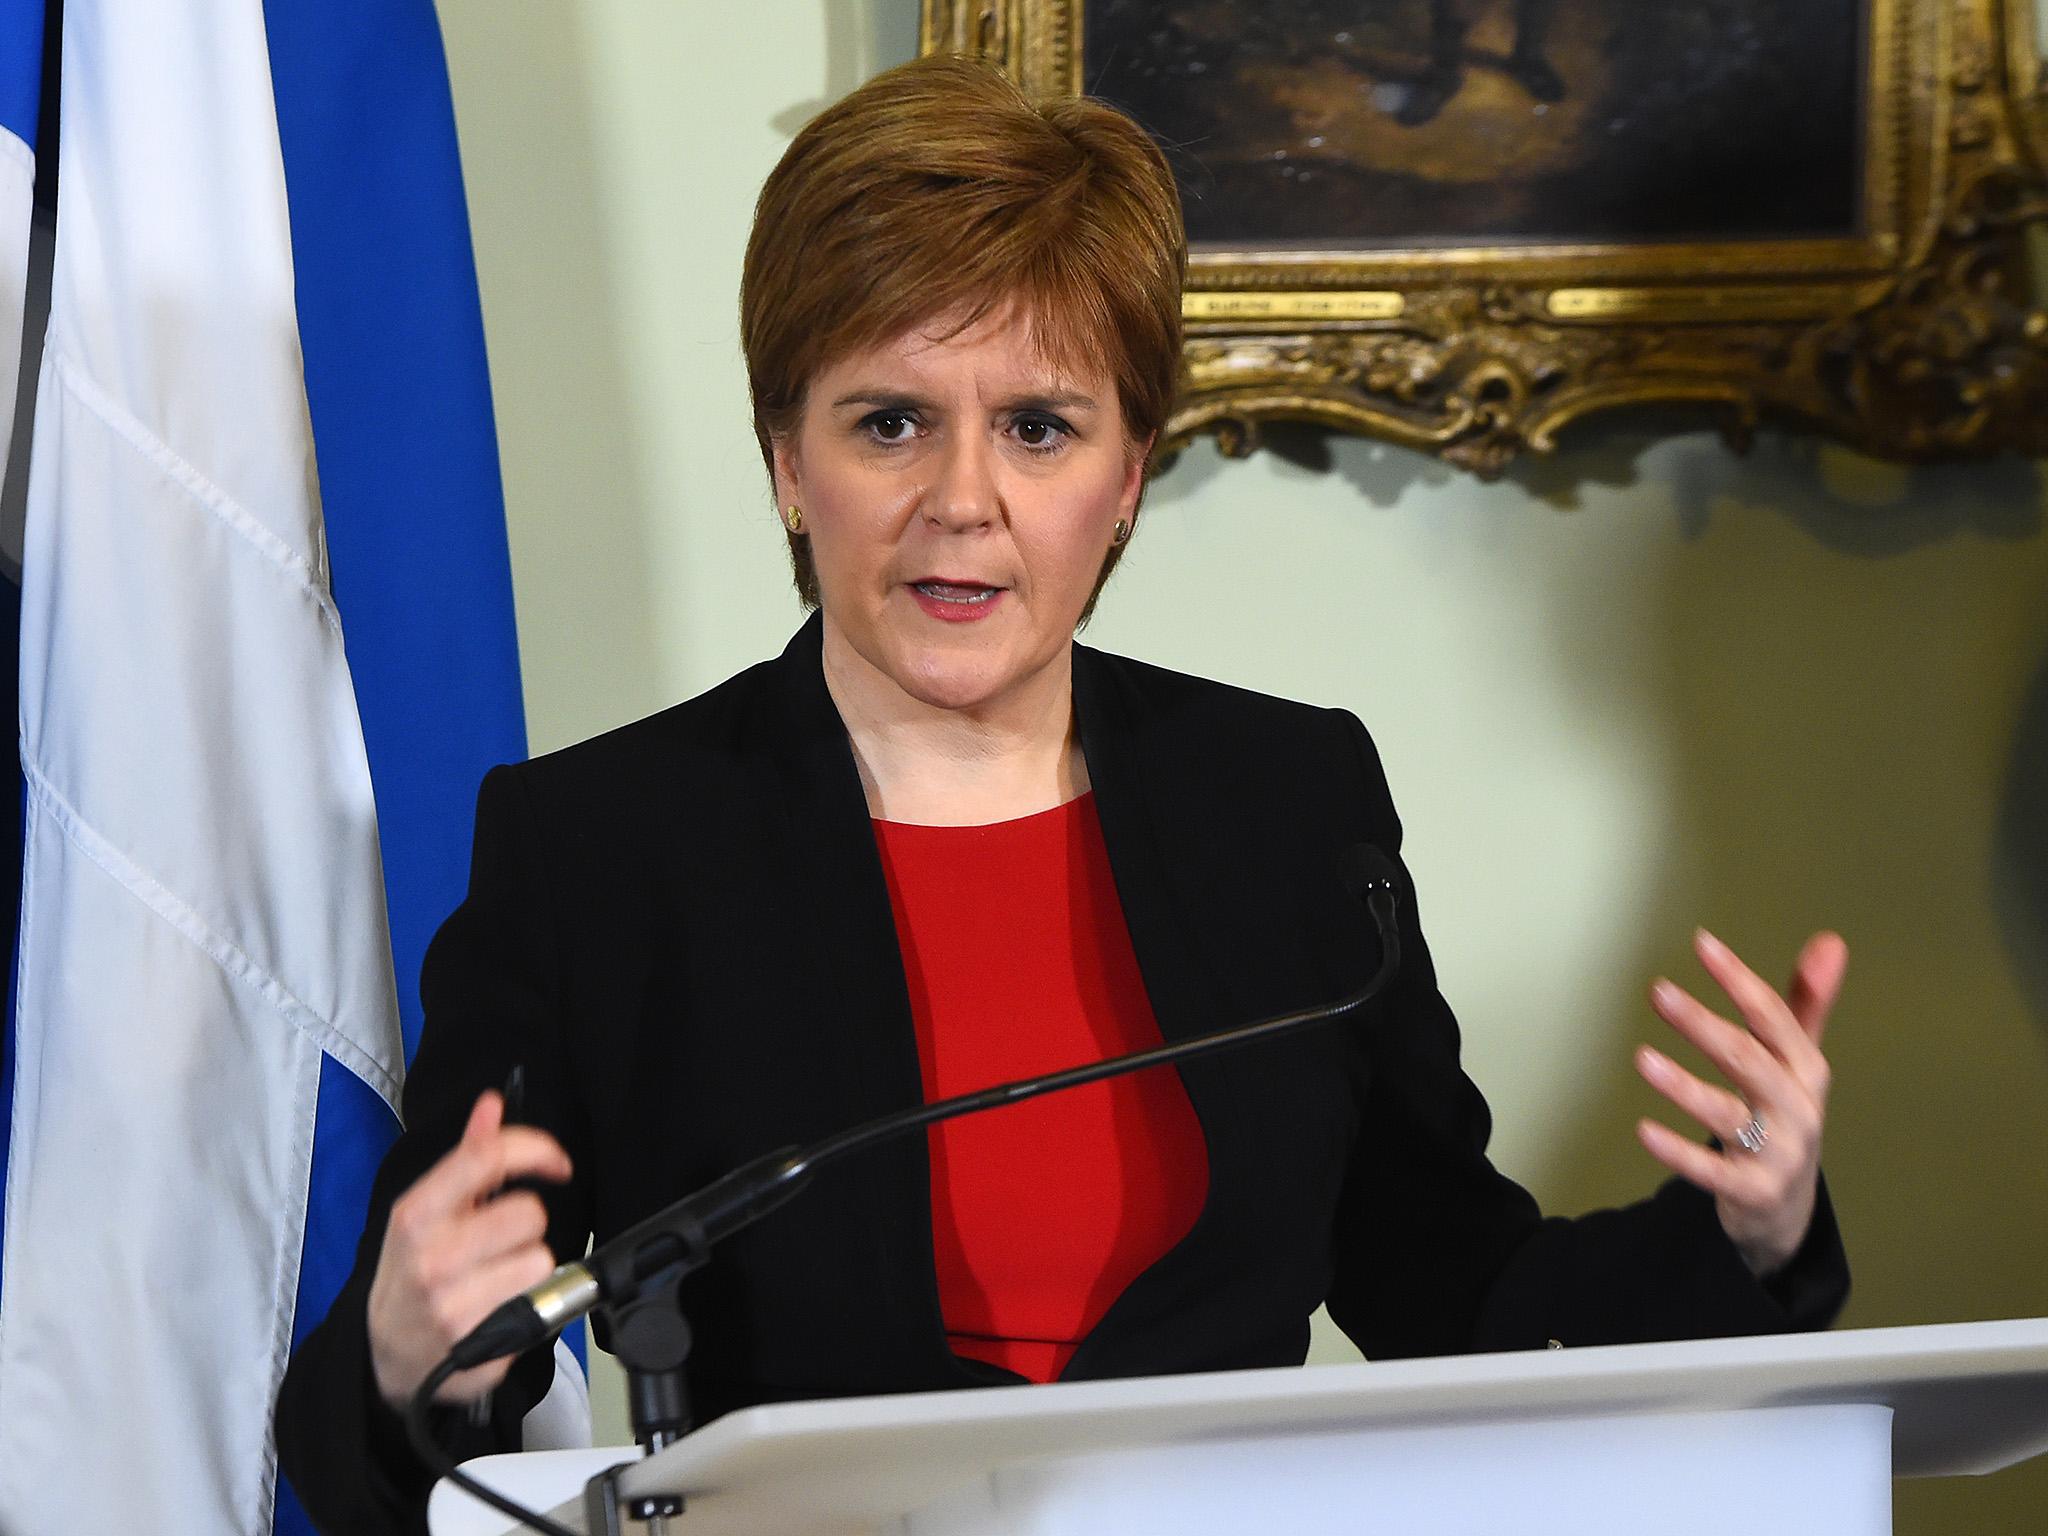 Ms Sturgeon said independent advisers would examine the matter